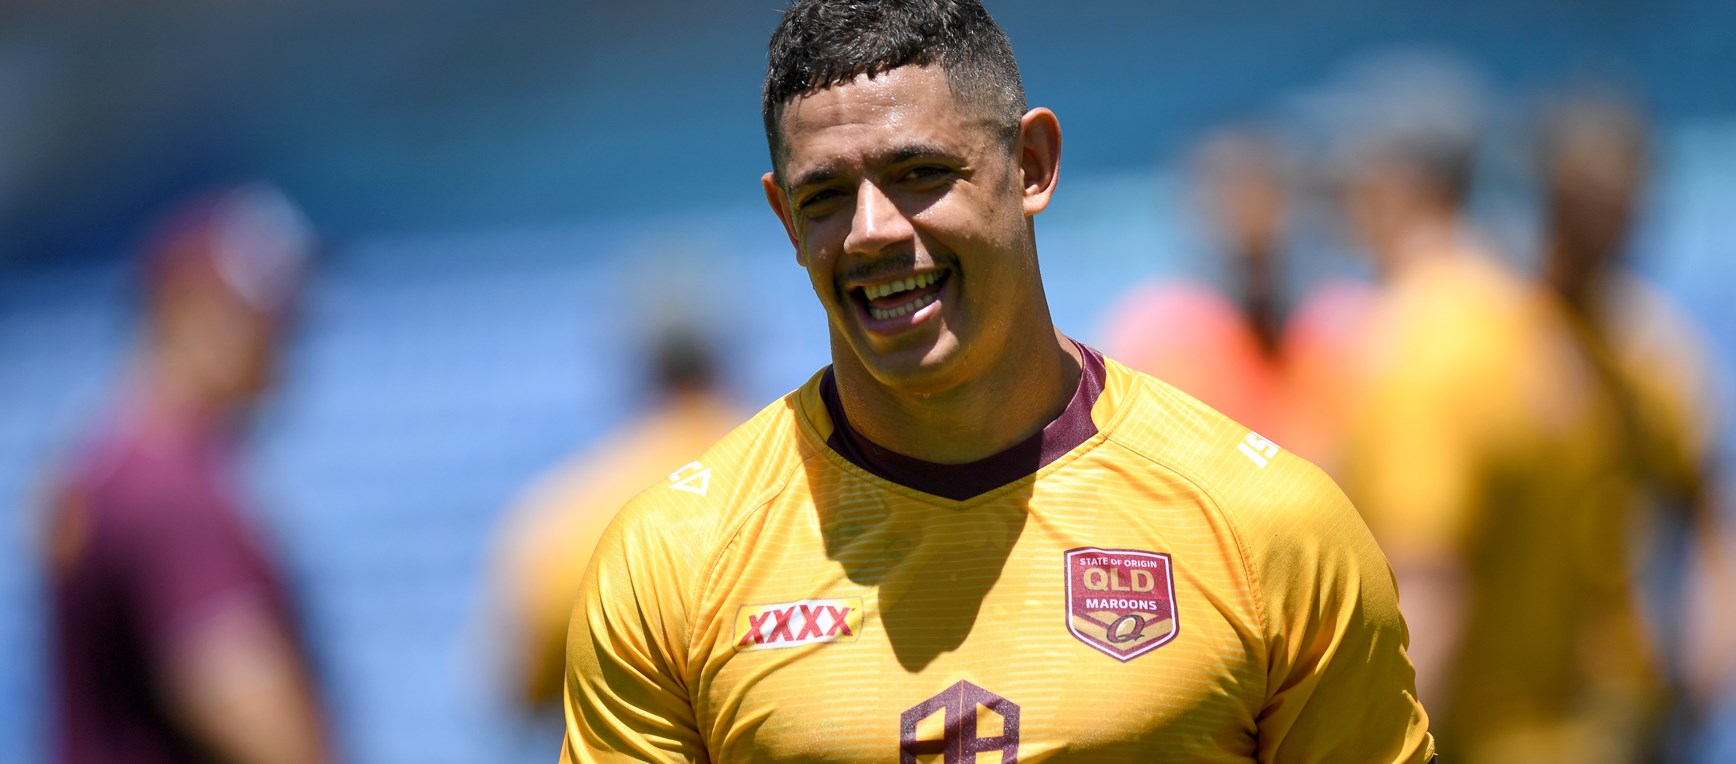 In pictures: Scorching Sunday training for the Maroons